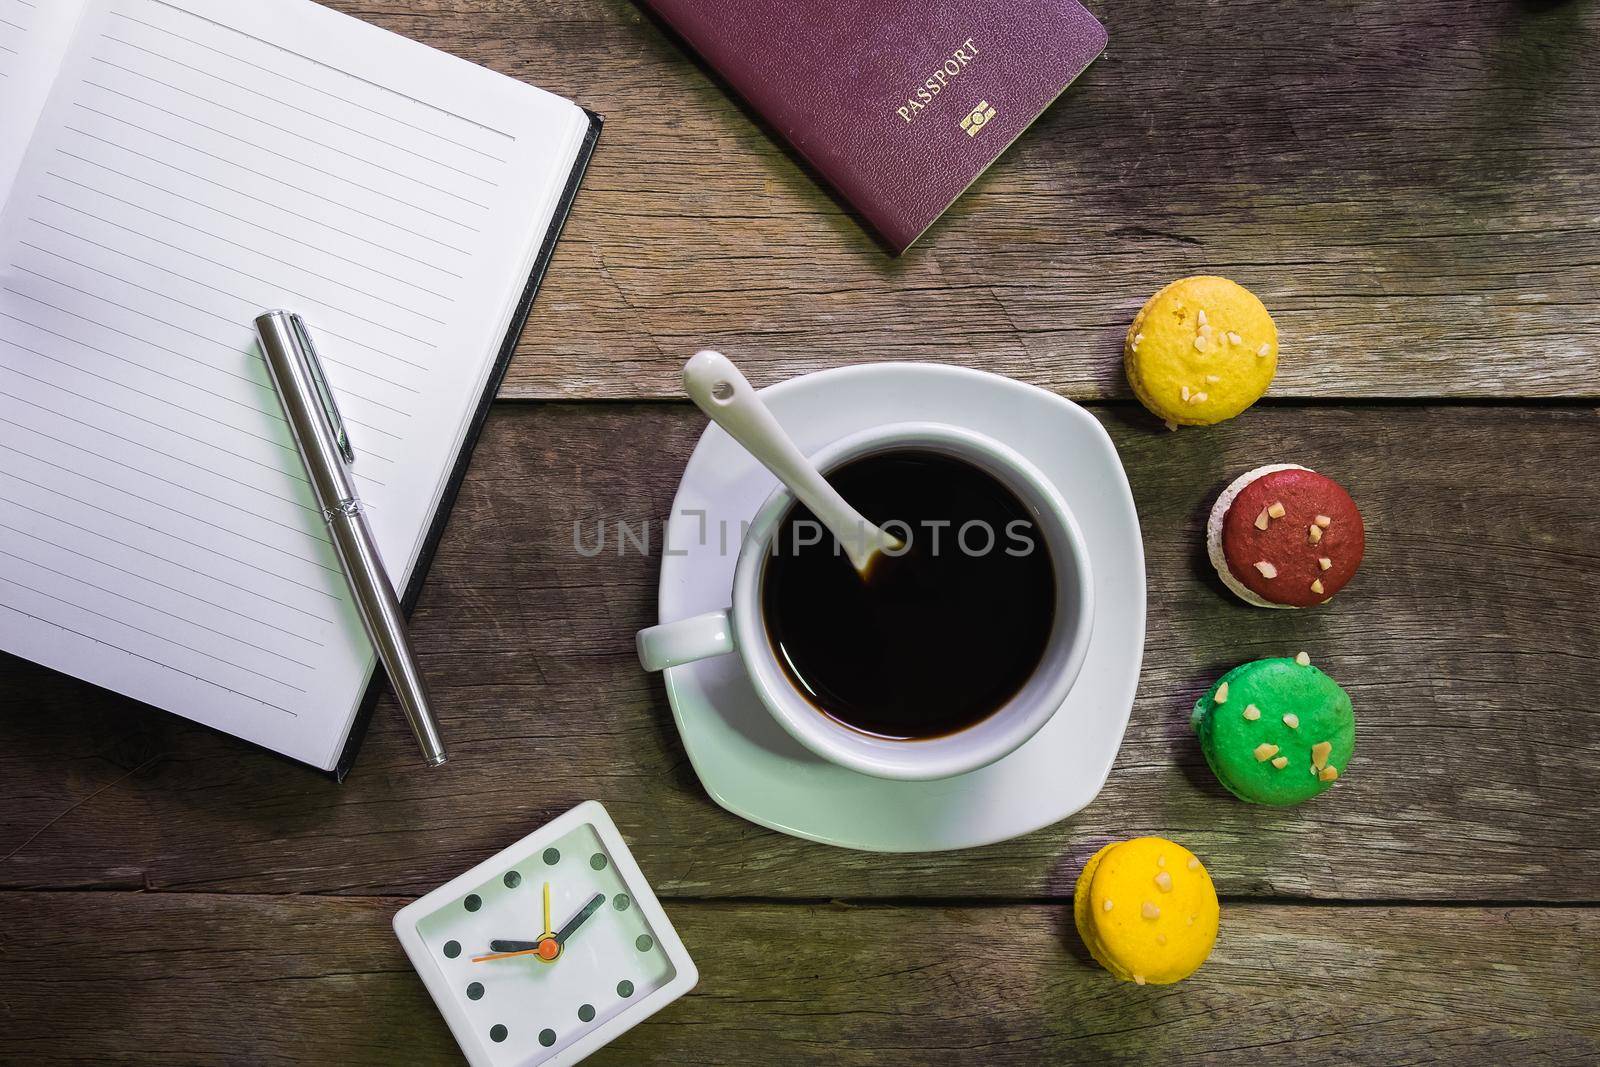 notebook on rustic wood with macaroon and cup of coffee and passport and clock